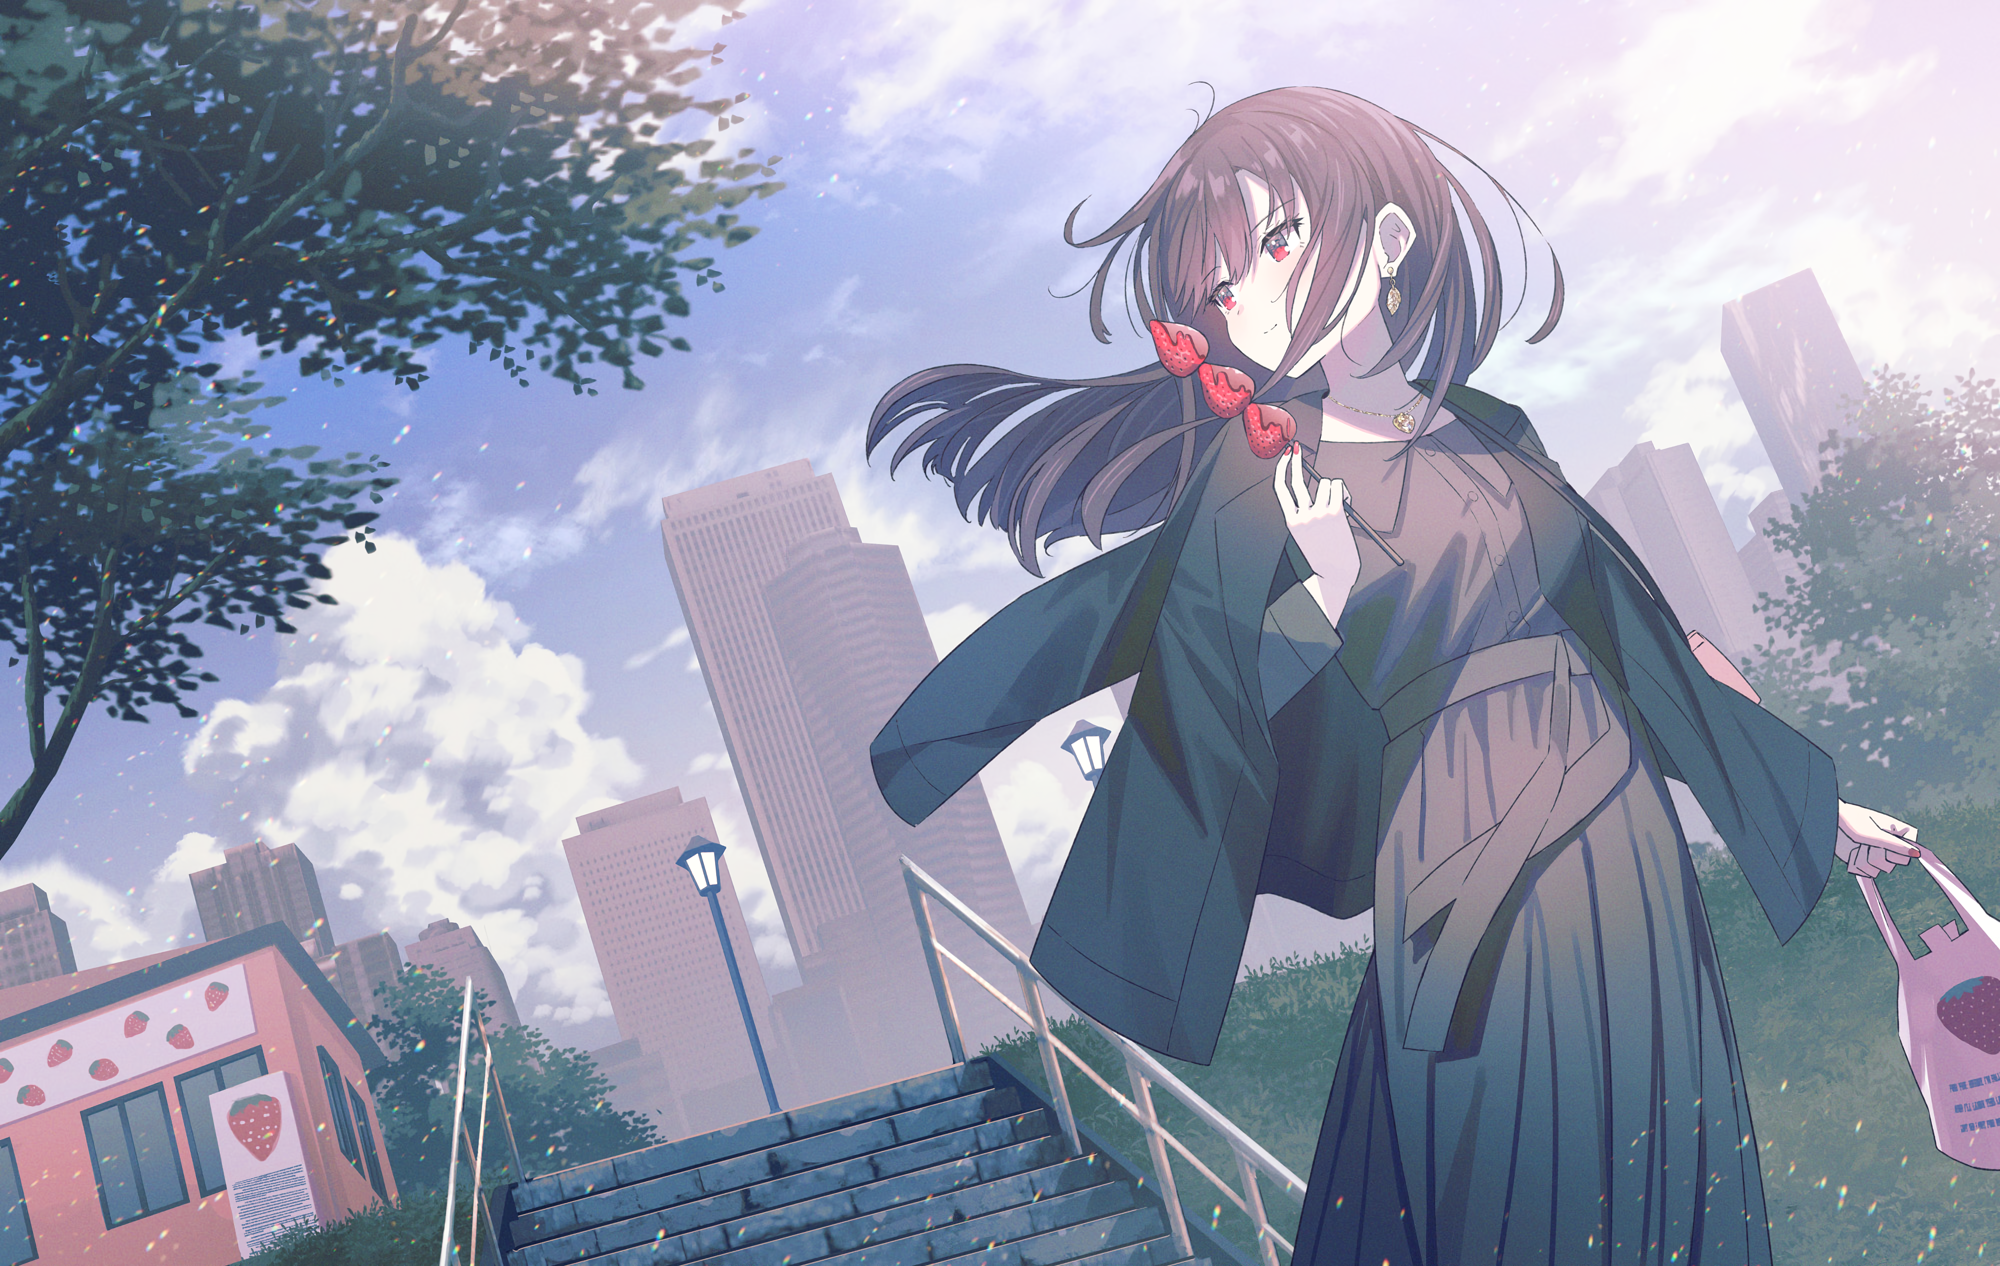 Koh RD Anime Girls Outdoors Women Outdoors Hair Blowing In The Wind Sky Clouds Building Looking Away 2000x1266